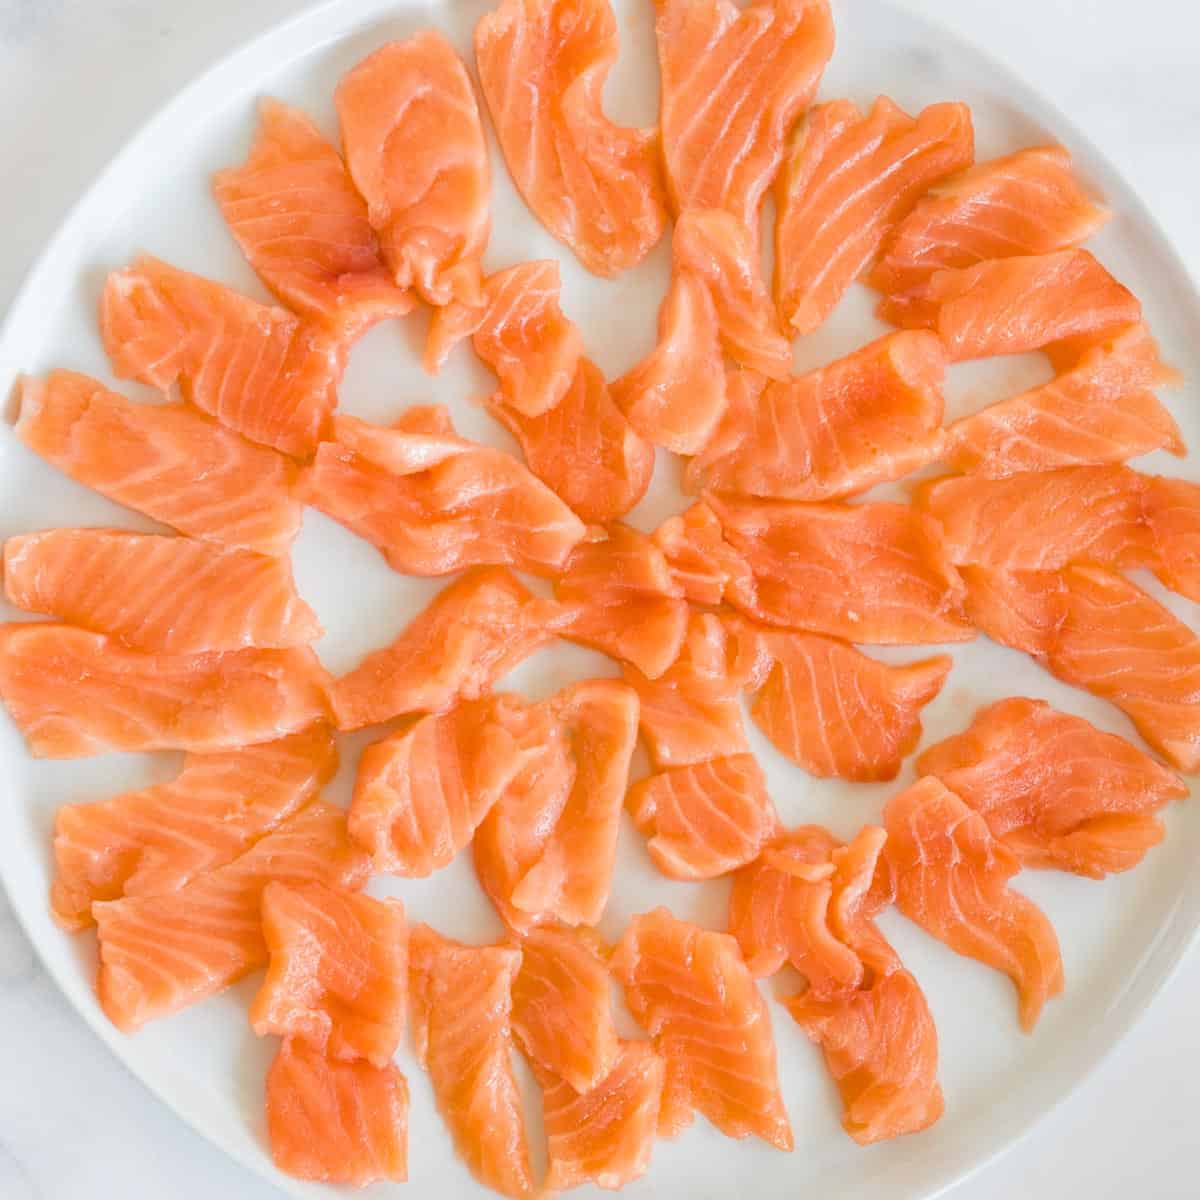 thinly sliced sushi grade salmon laid out in a circular pattern on a white plate